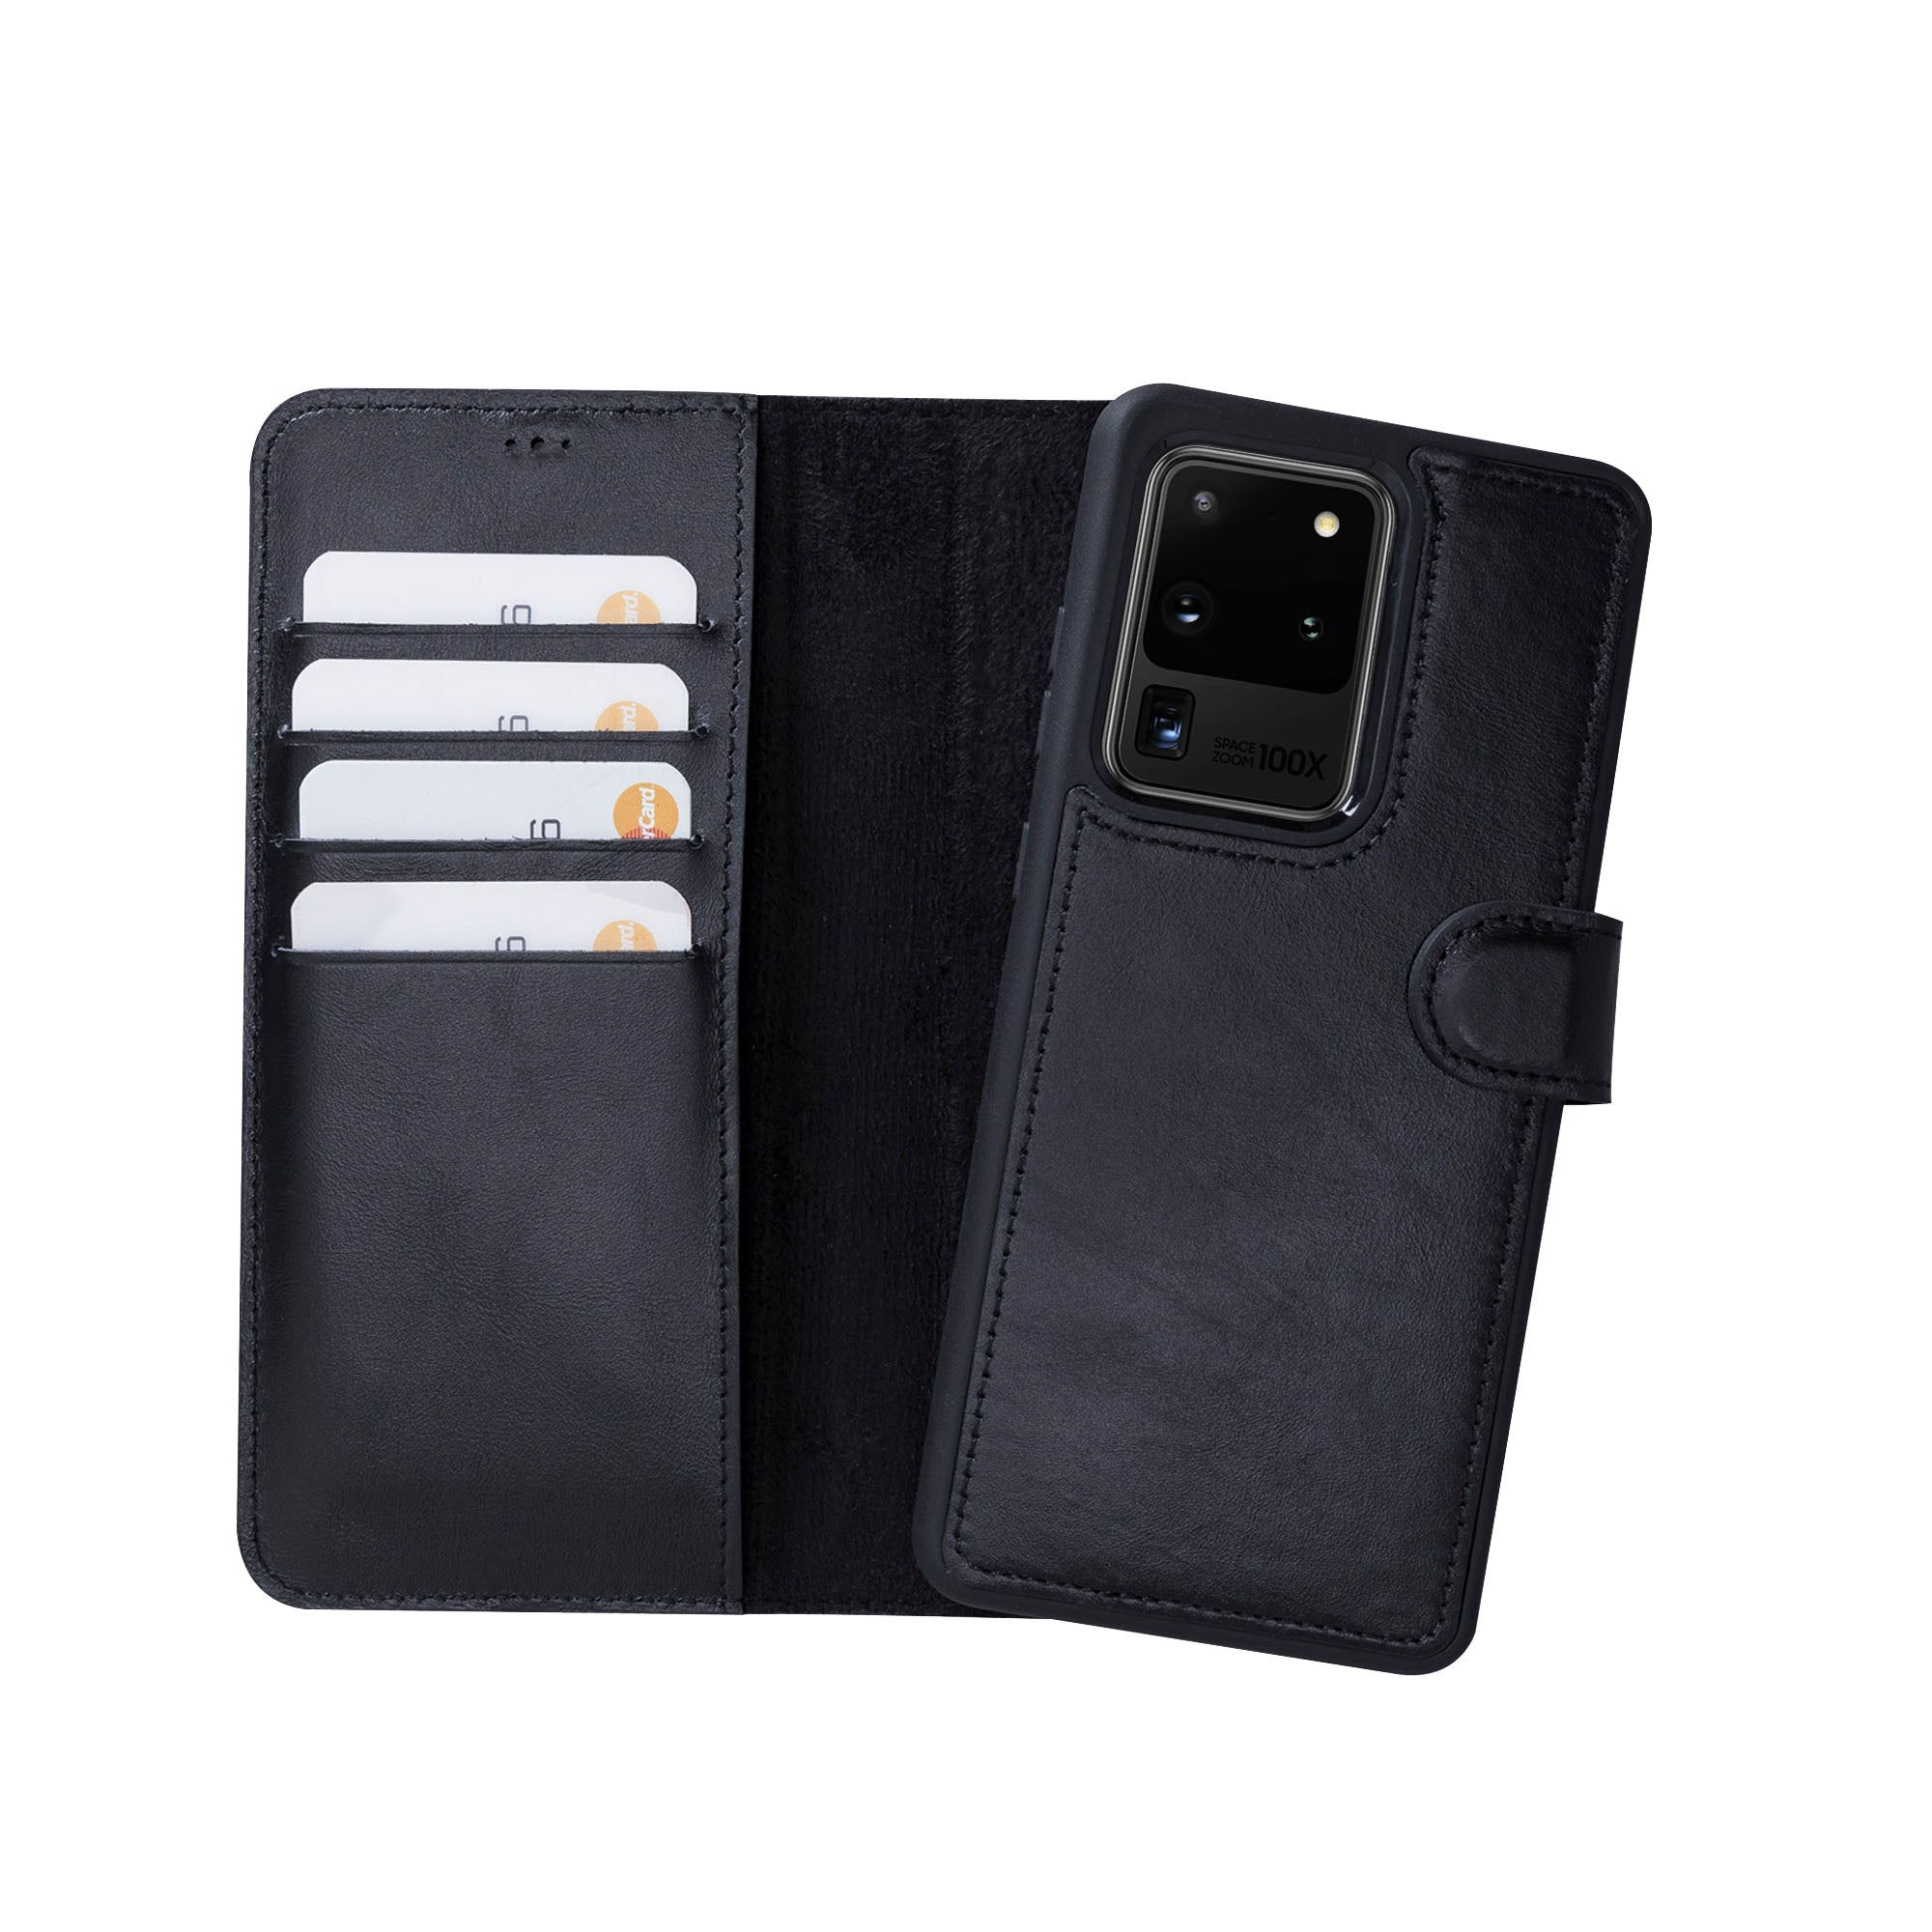 Detachable Magnetic Leather Wallet Case For Samsung Phones - The